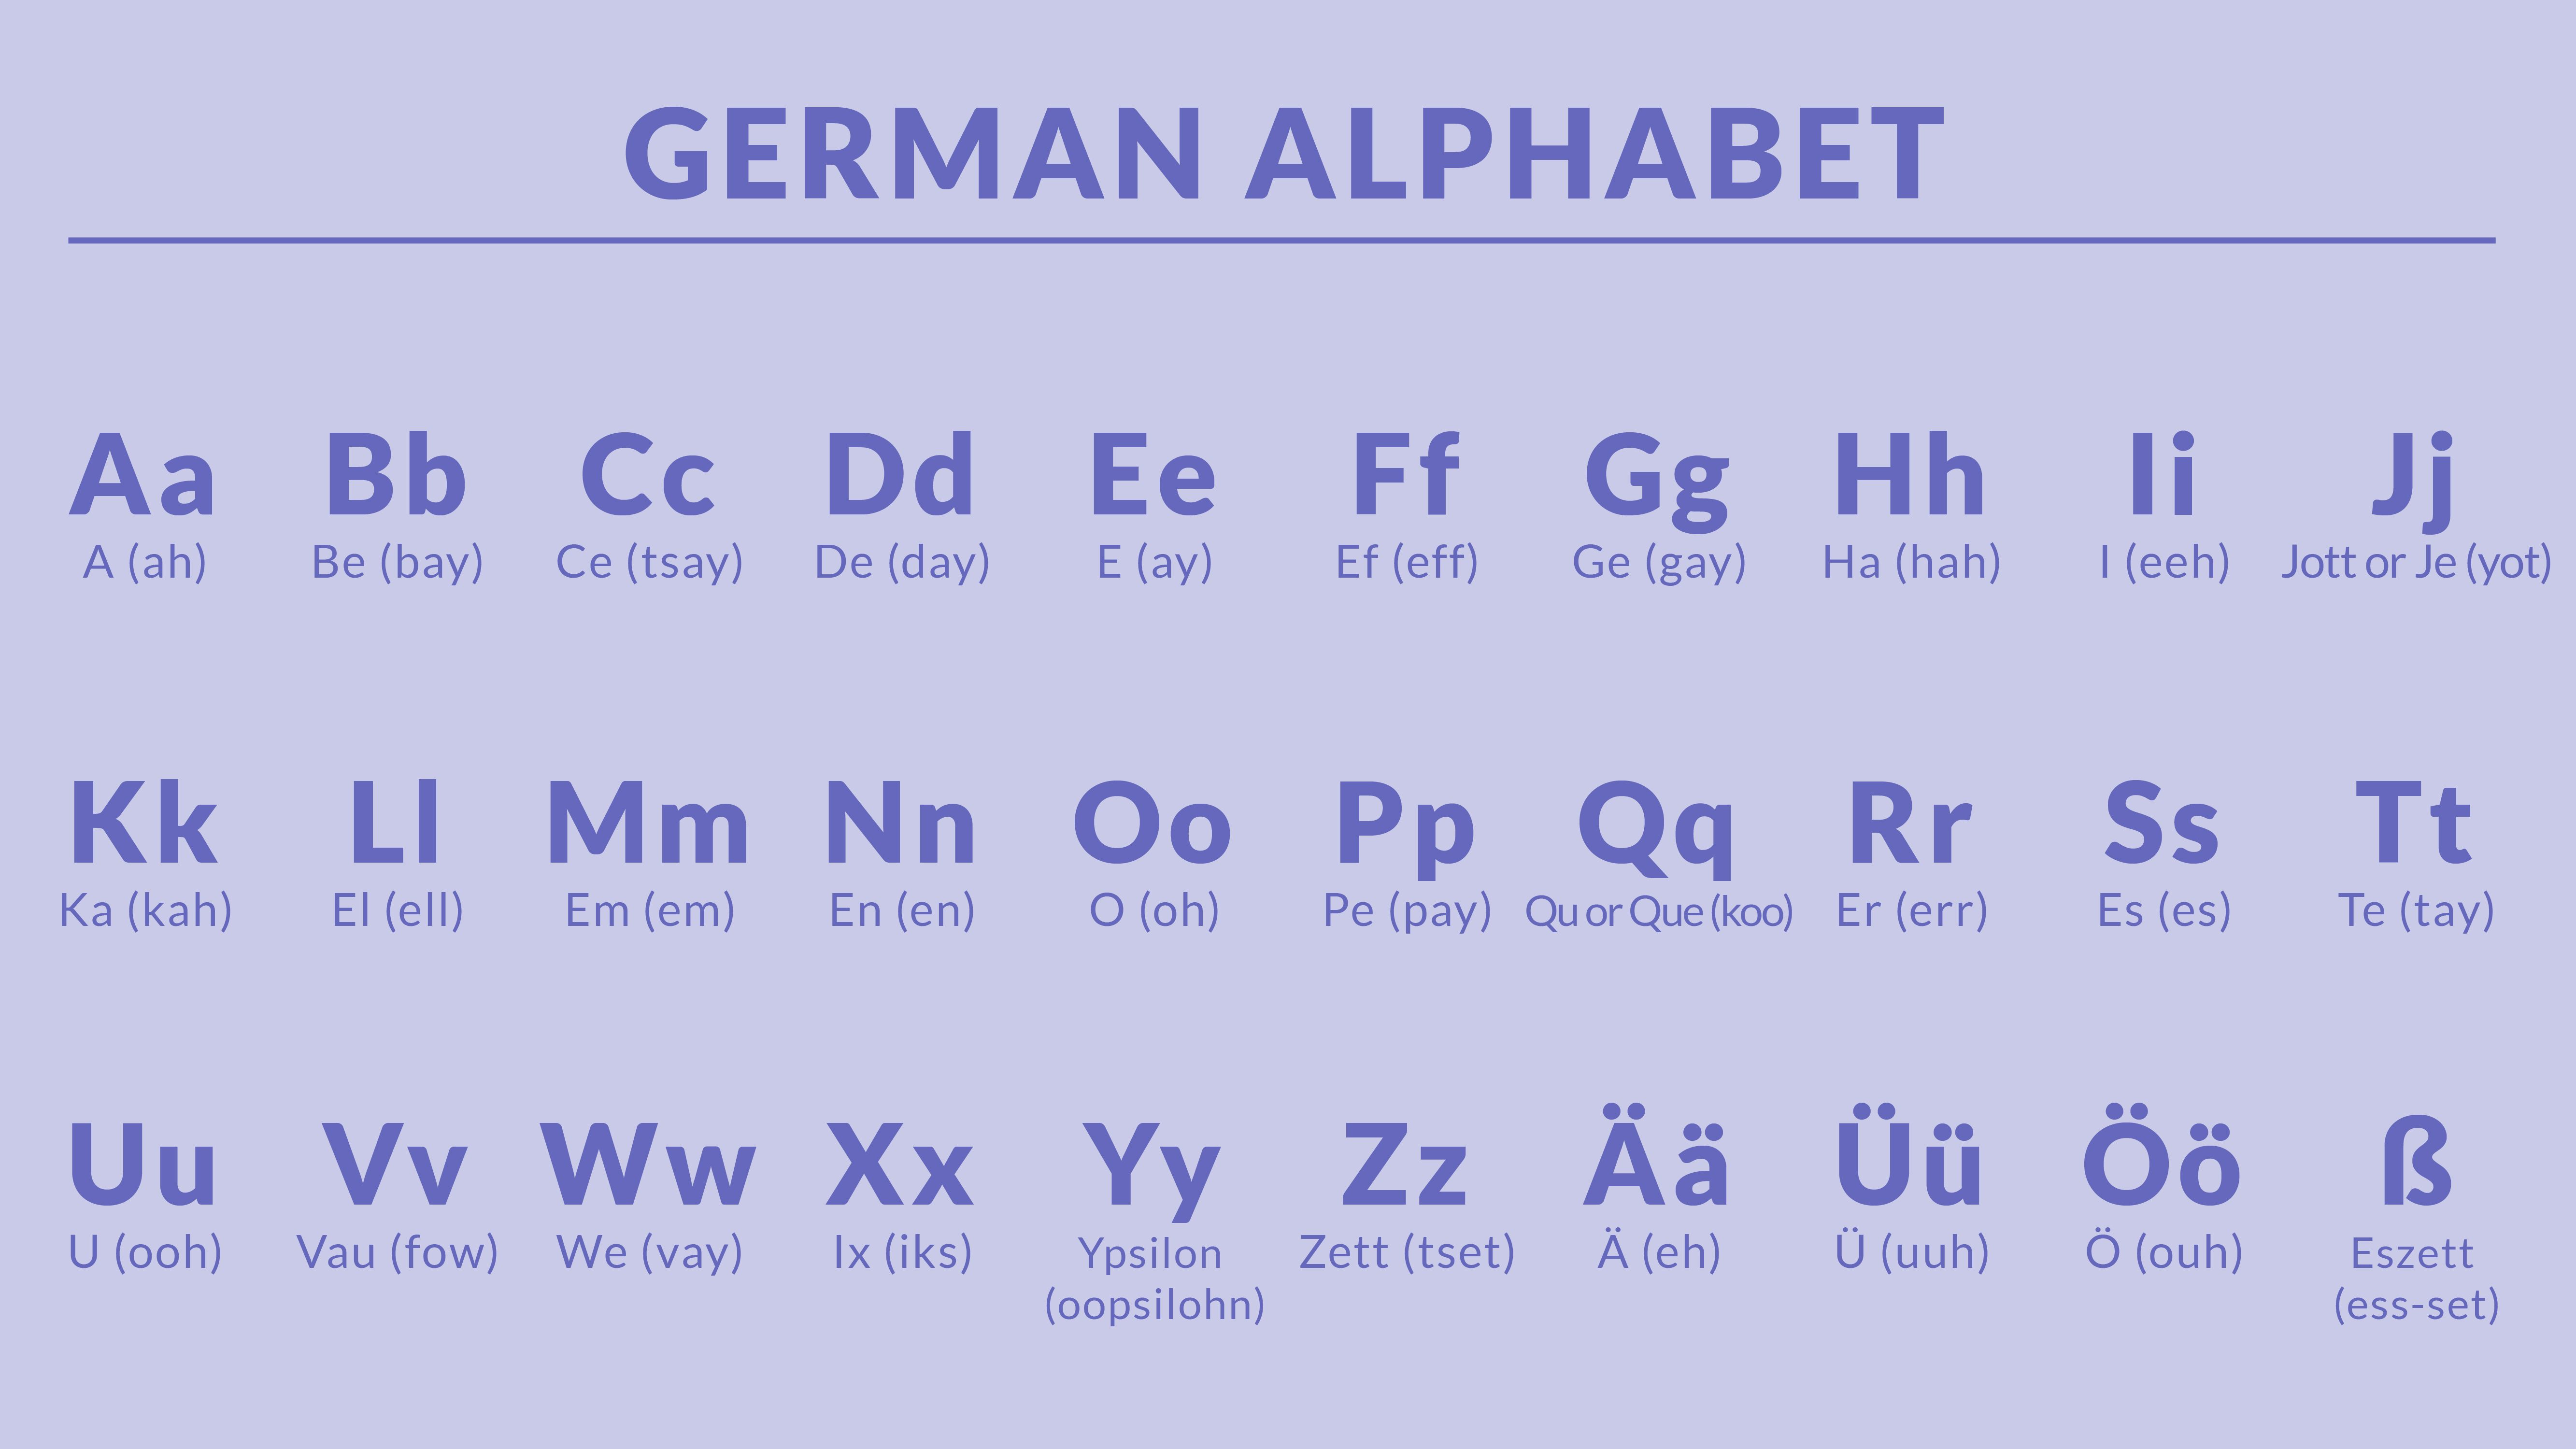 A picture of the German alphabet with pronunciations for each letter.